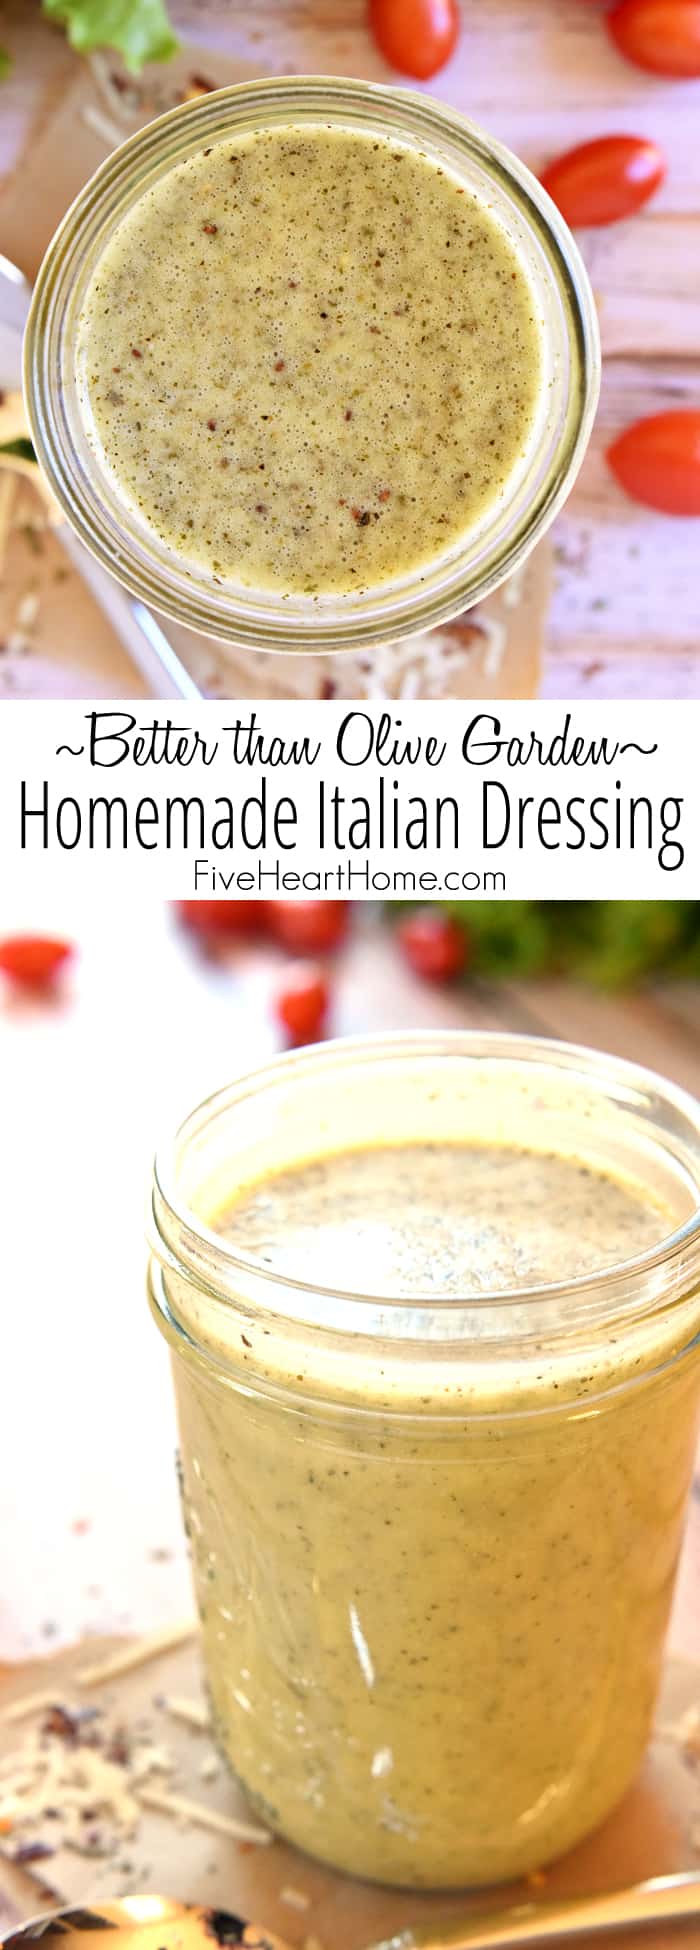 "Better than Olive Garden" Homemade Italian Dressing ~ this all-natural, zesty salad dressing is economical, easy to make, delicious on salads, and makes an excellent marinade! | FiveHeartHome.com via @fivehearthome